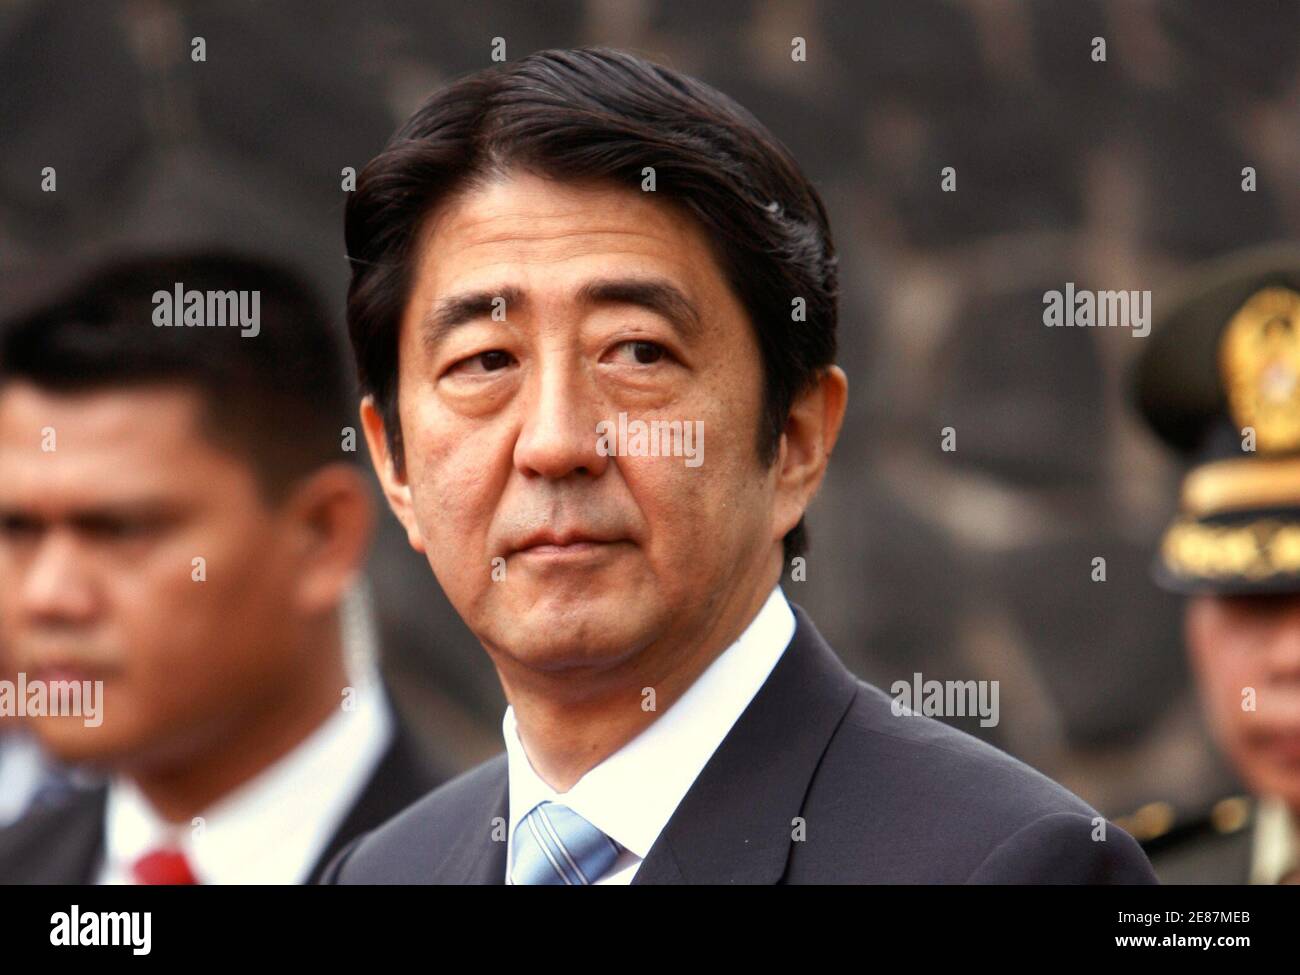 Japan's Prime Minister Shinzo Abe (front) is seen after praying in front of thea grave of a Japanese soldier at the Hero Cemetery in Jakarta August 21, 2007.   REUTERS/Beawiharta (INDONESIA) Stock Photo